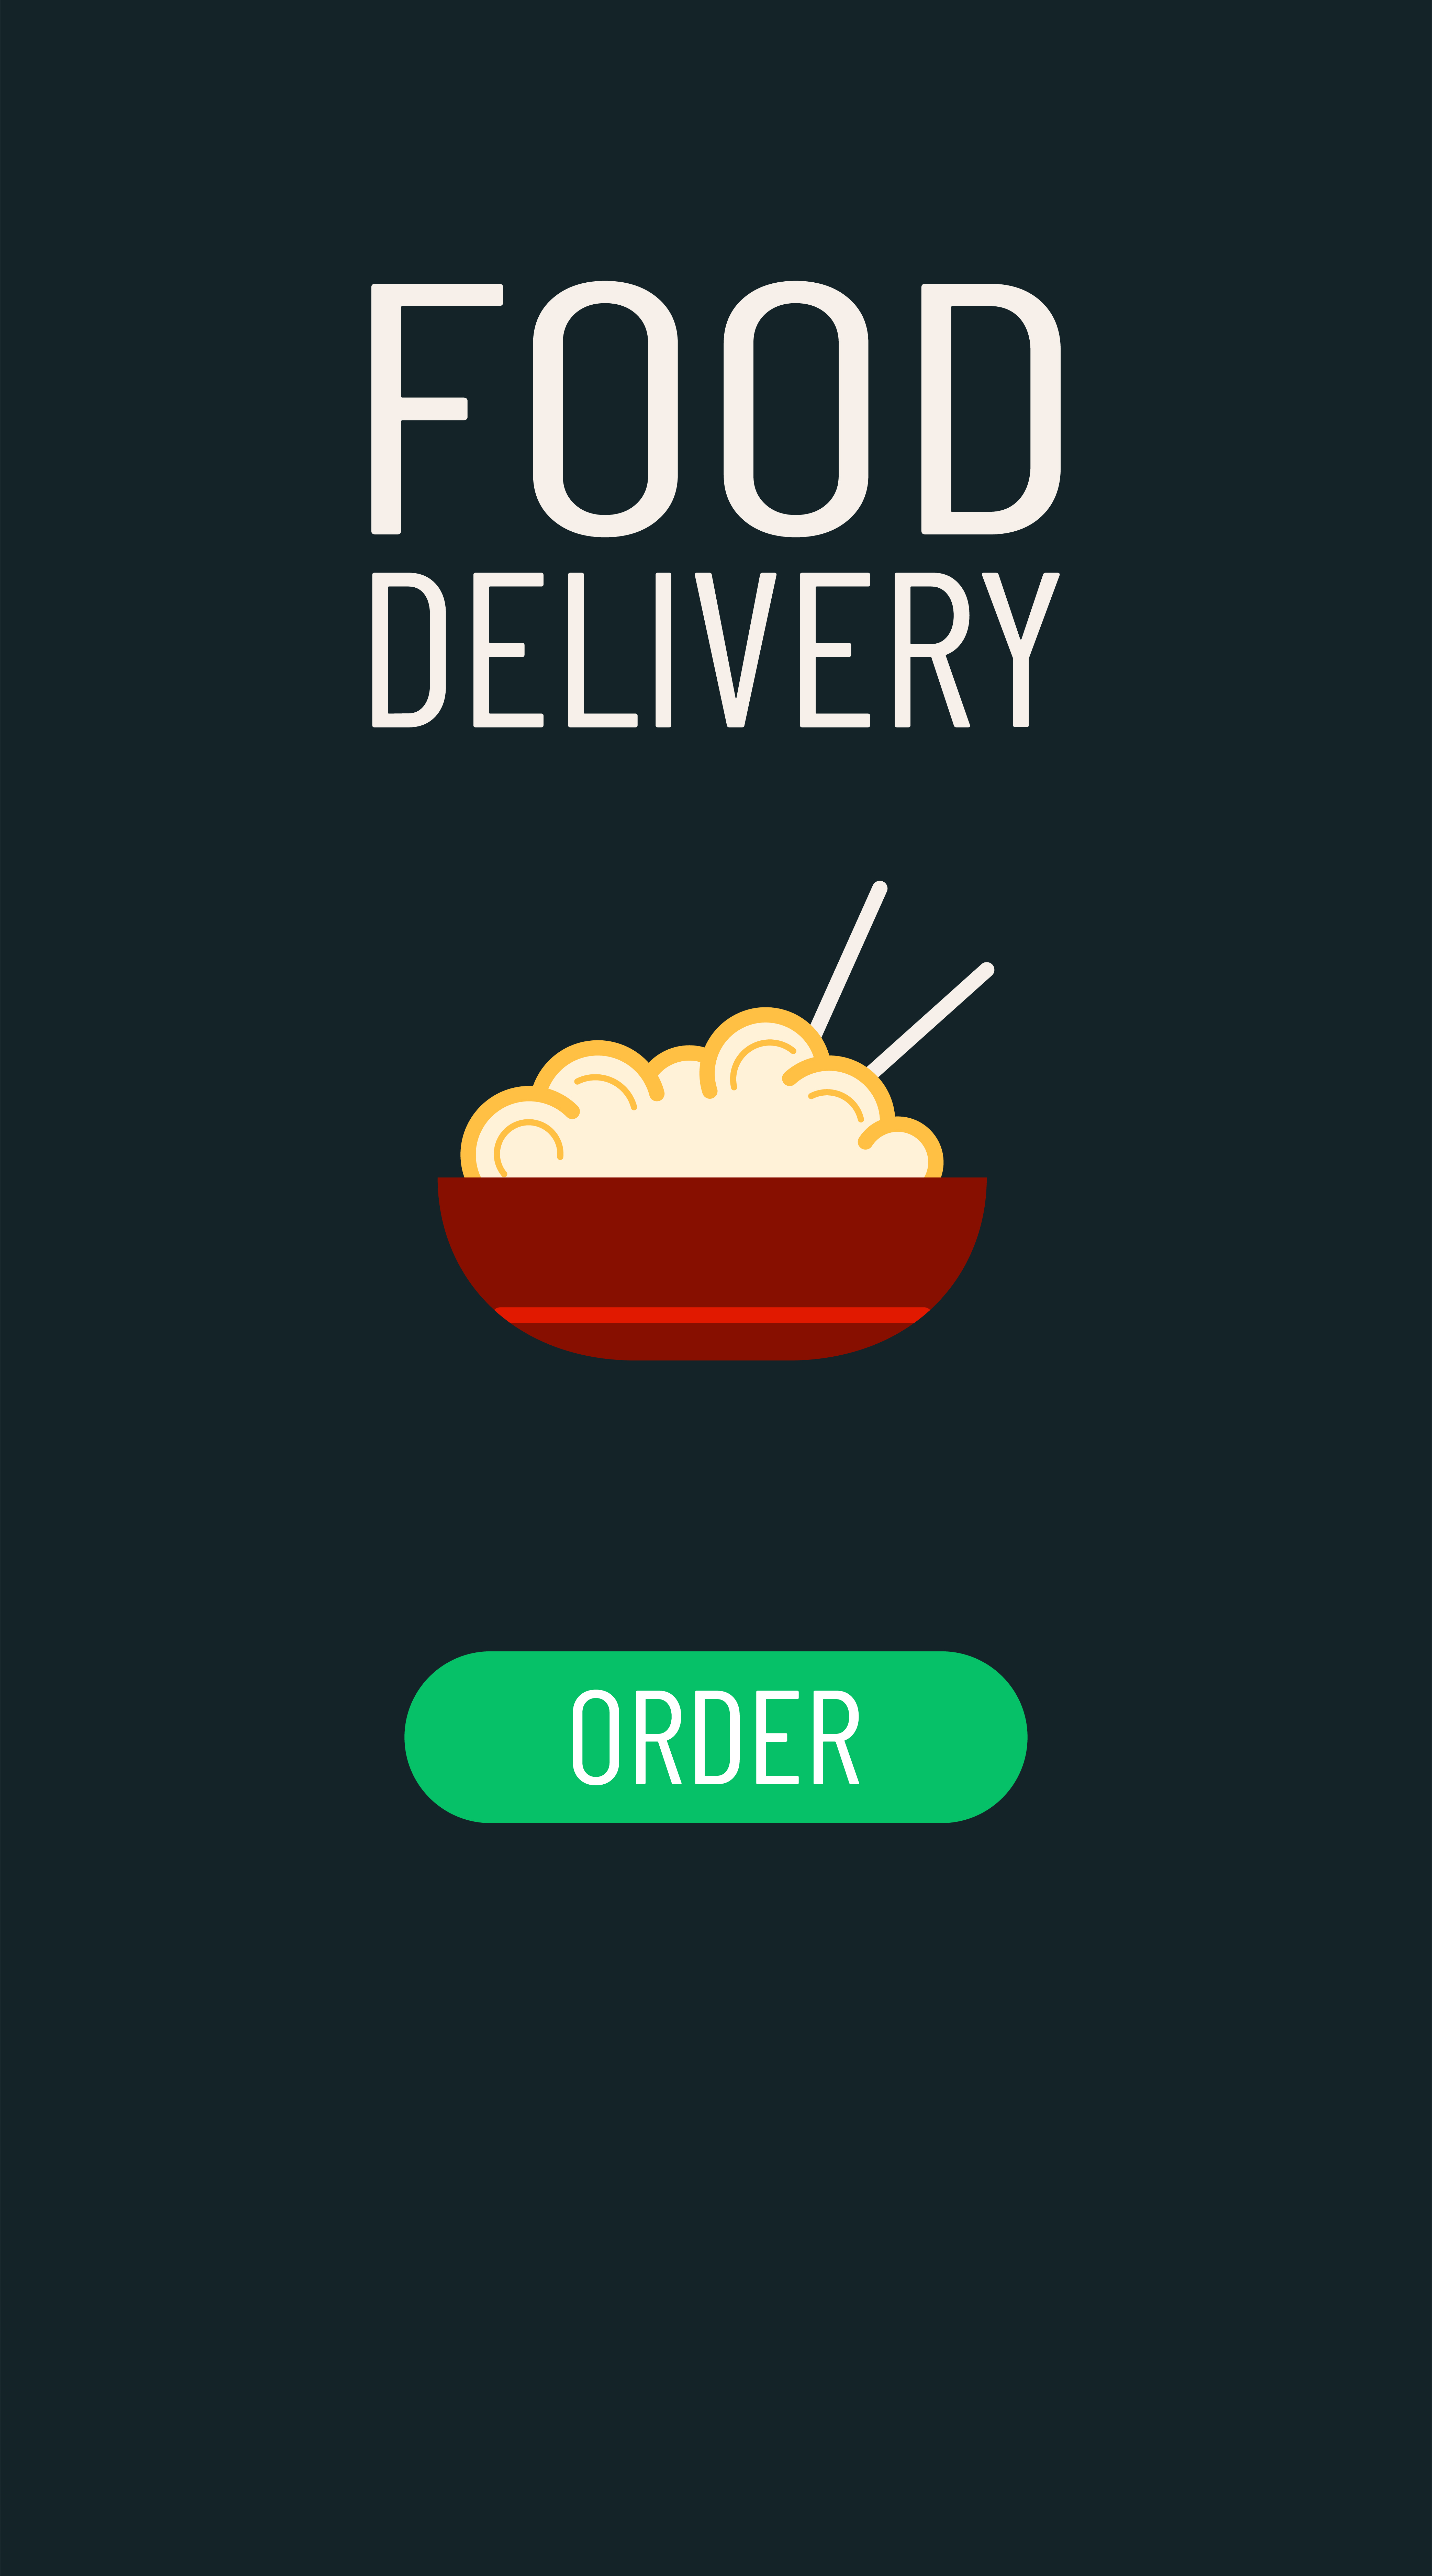 Food delivery order. Smartphone screen with online fast delivery food ordering. White lettering, drawn noodles icon and green button. Vector illustration.